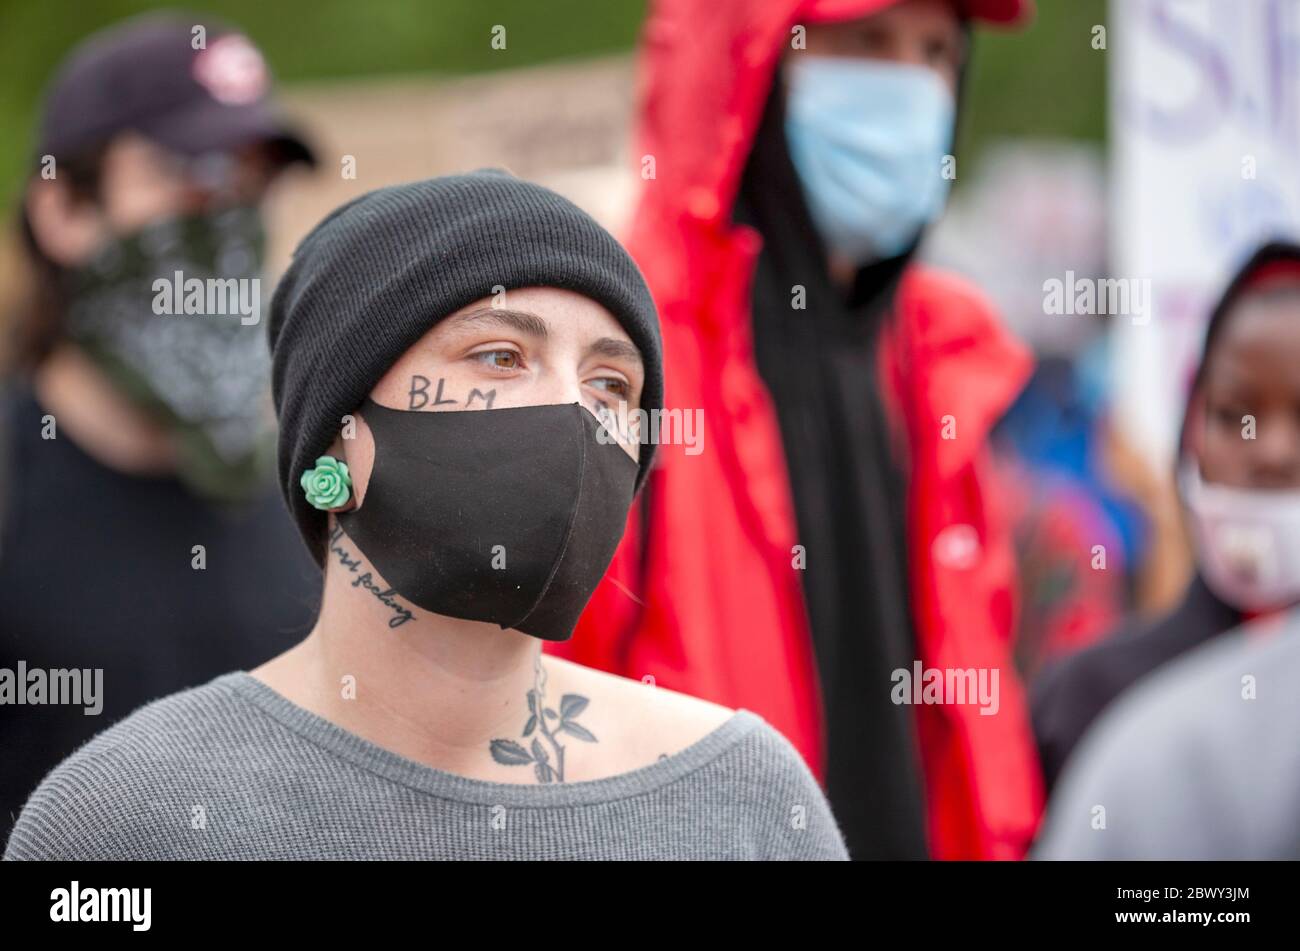 Young woman, with neck tattoos, wearing a black hat and protective face mask during the Black Lives Matter UK protest march. London, England, UK Stock Photo